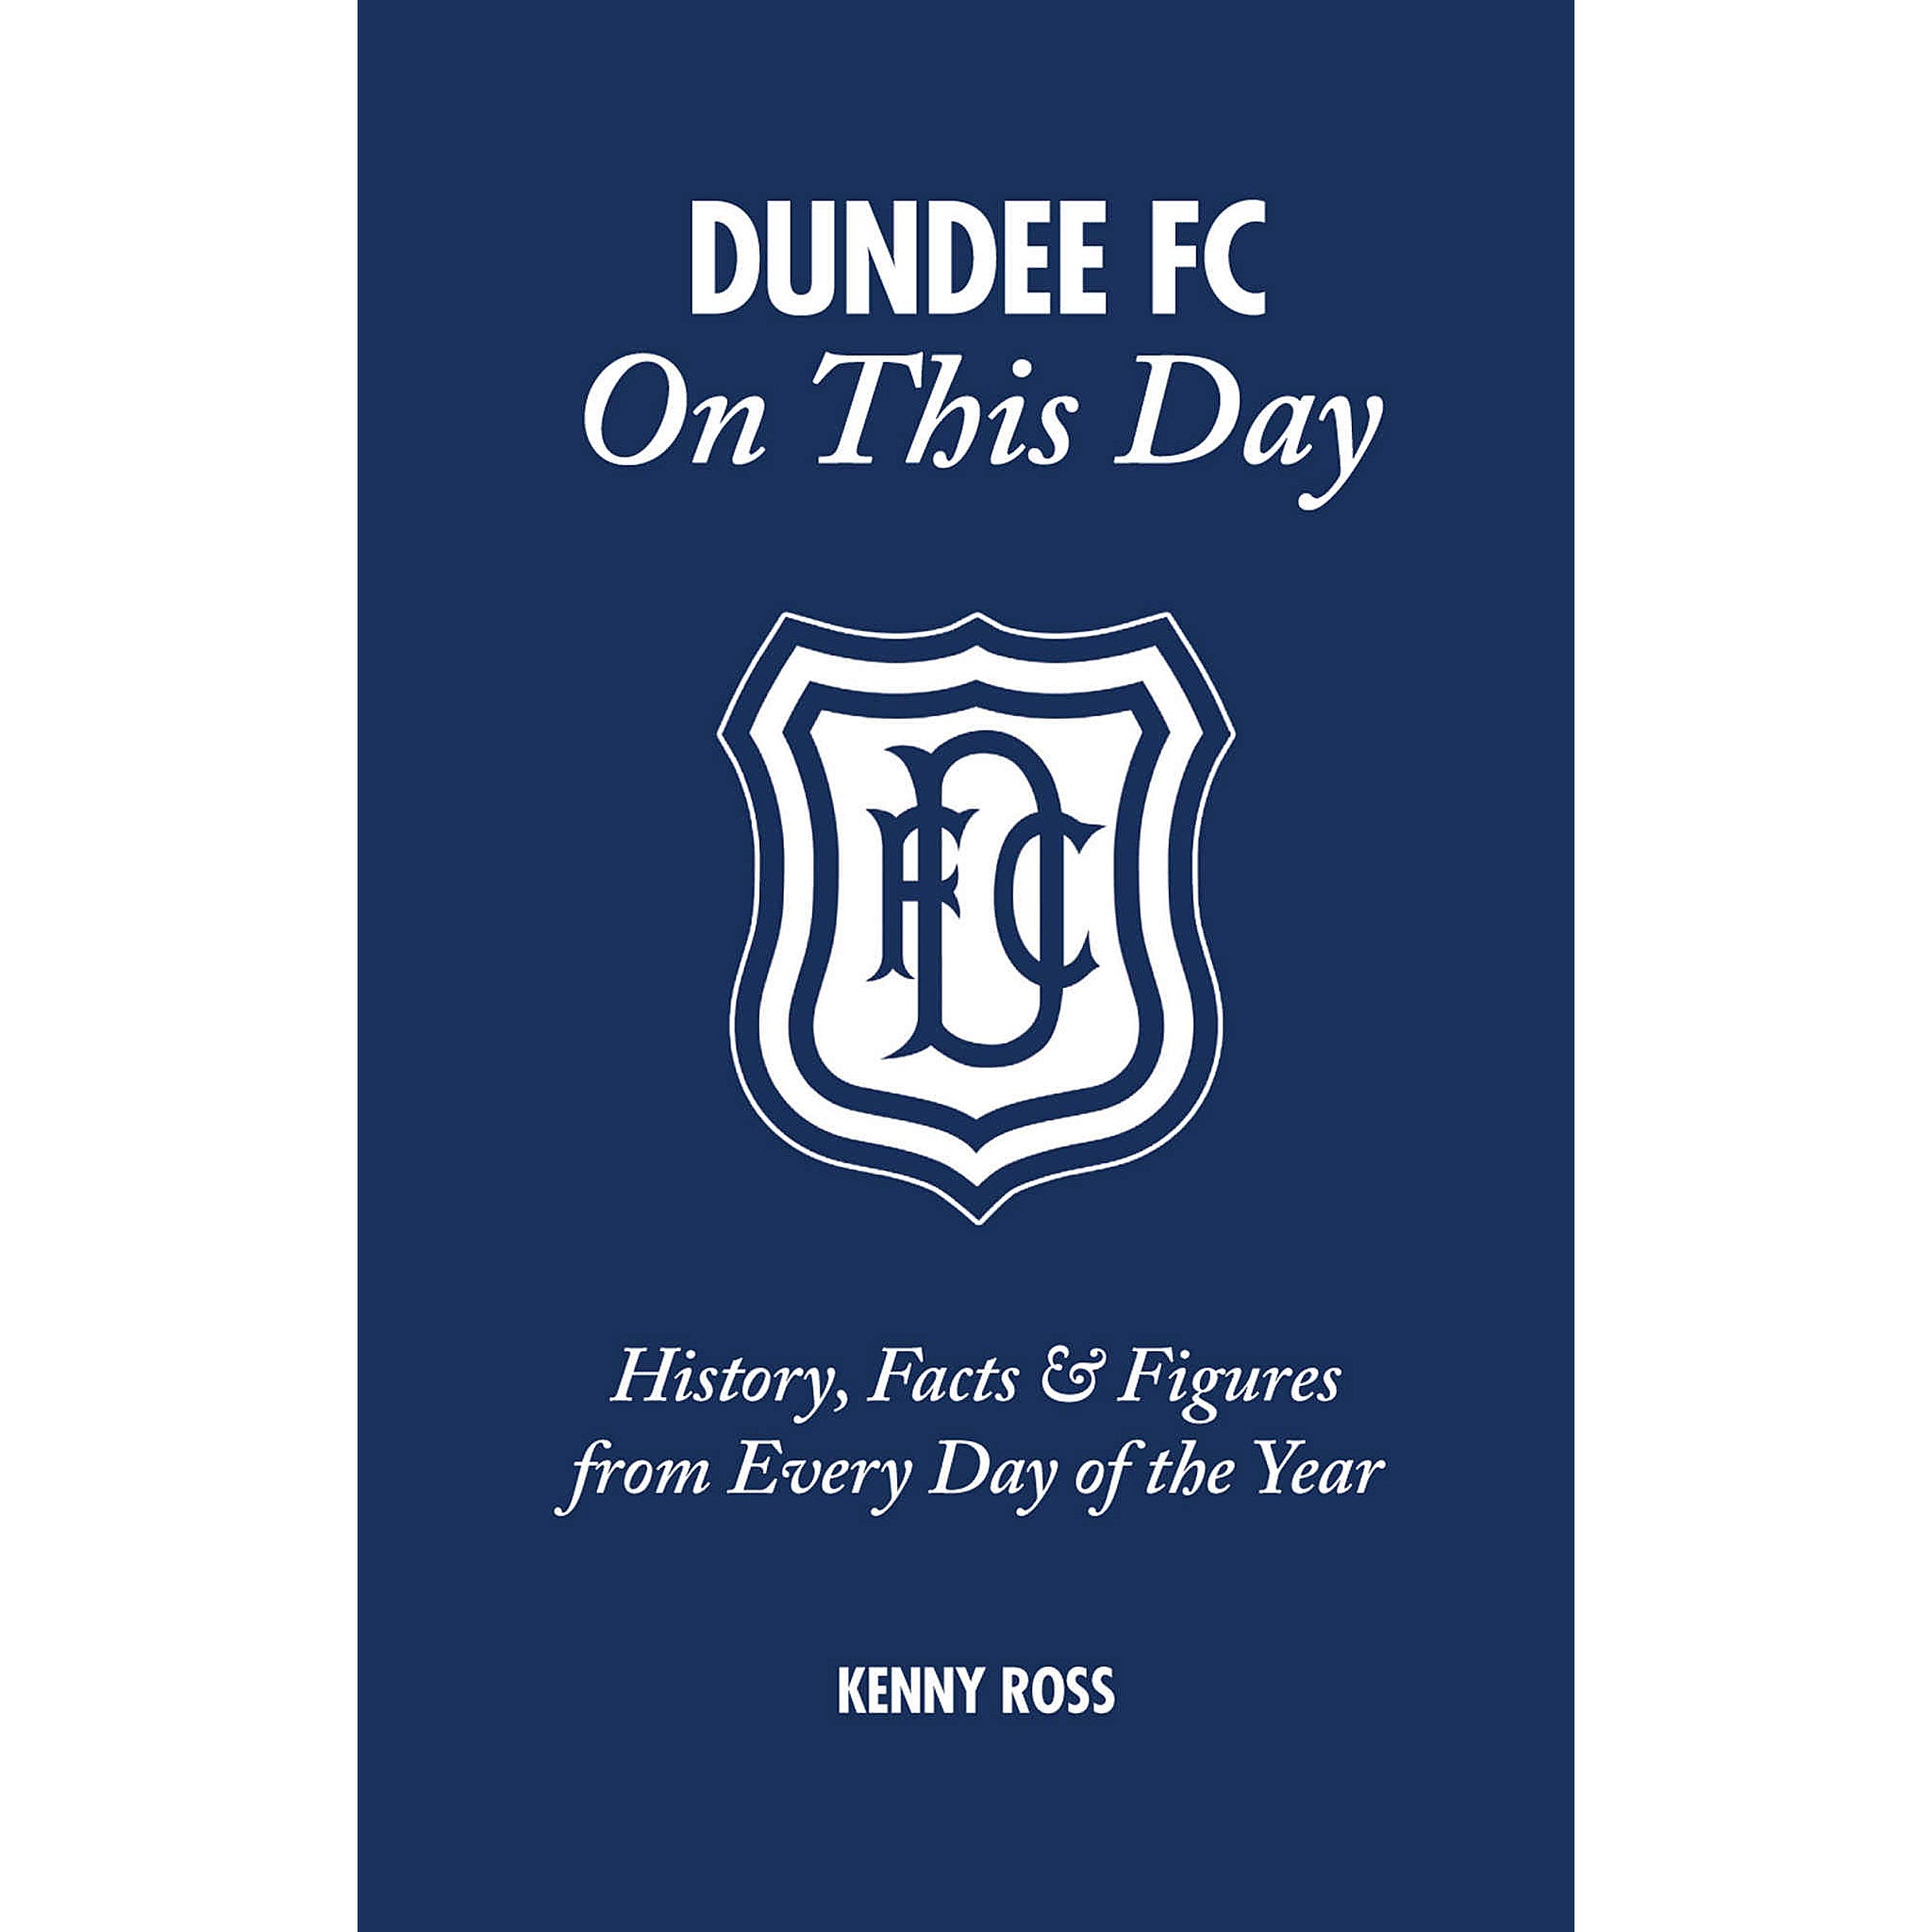 Dundee FC On This Day – History, Facts & Figures from Every Day of the Year